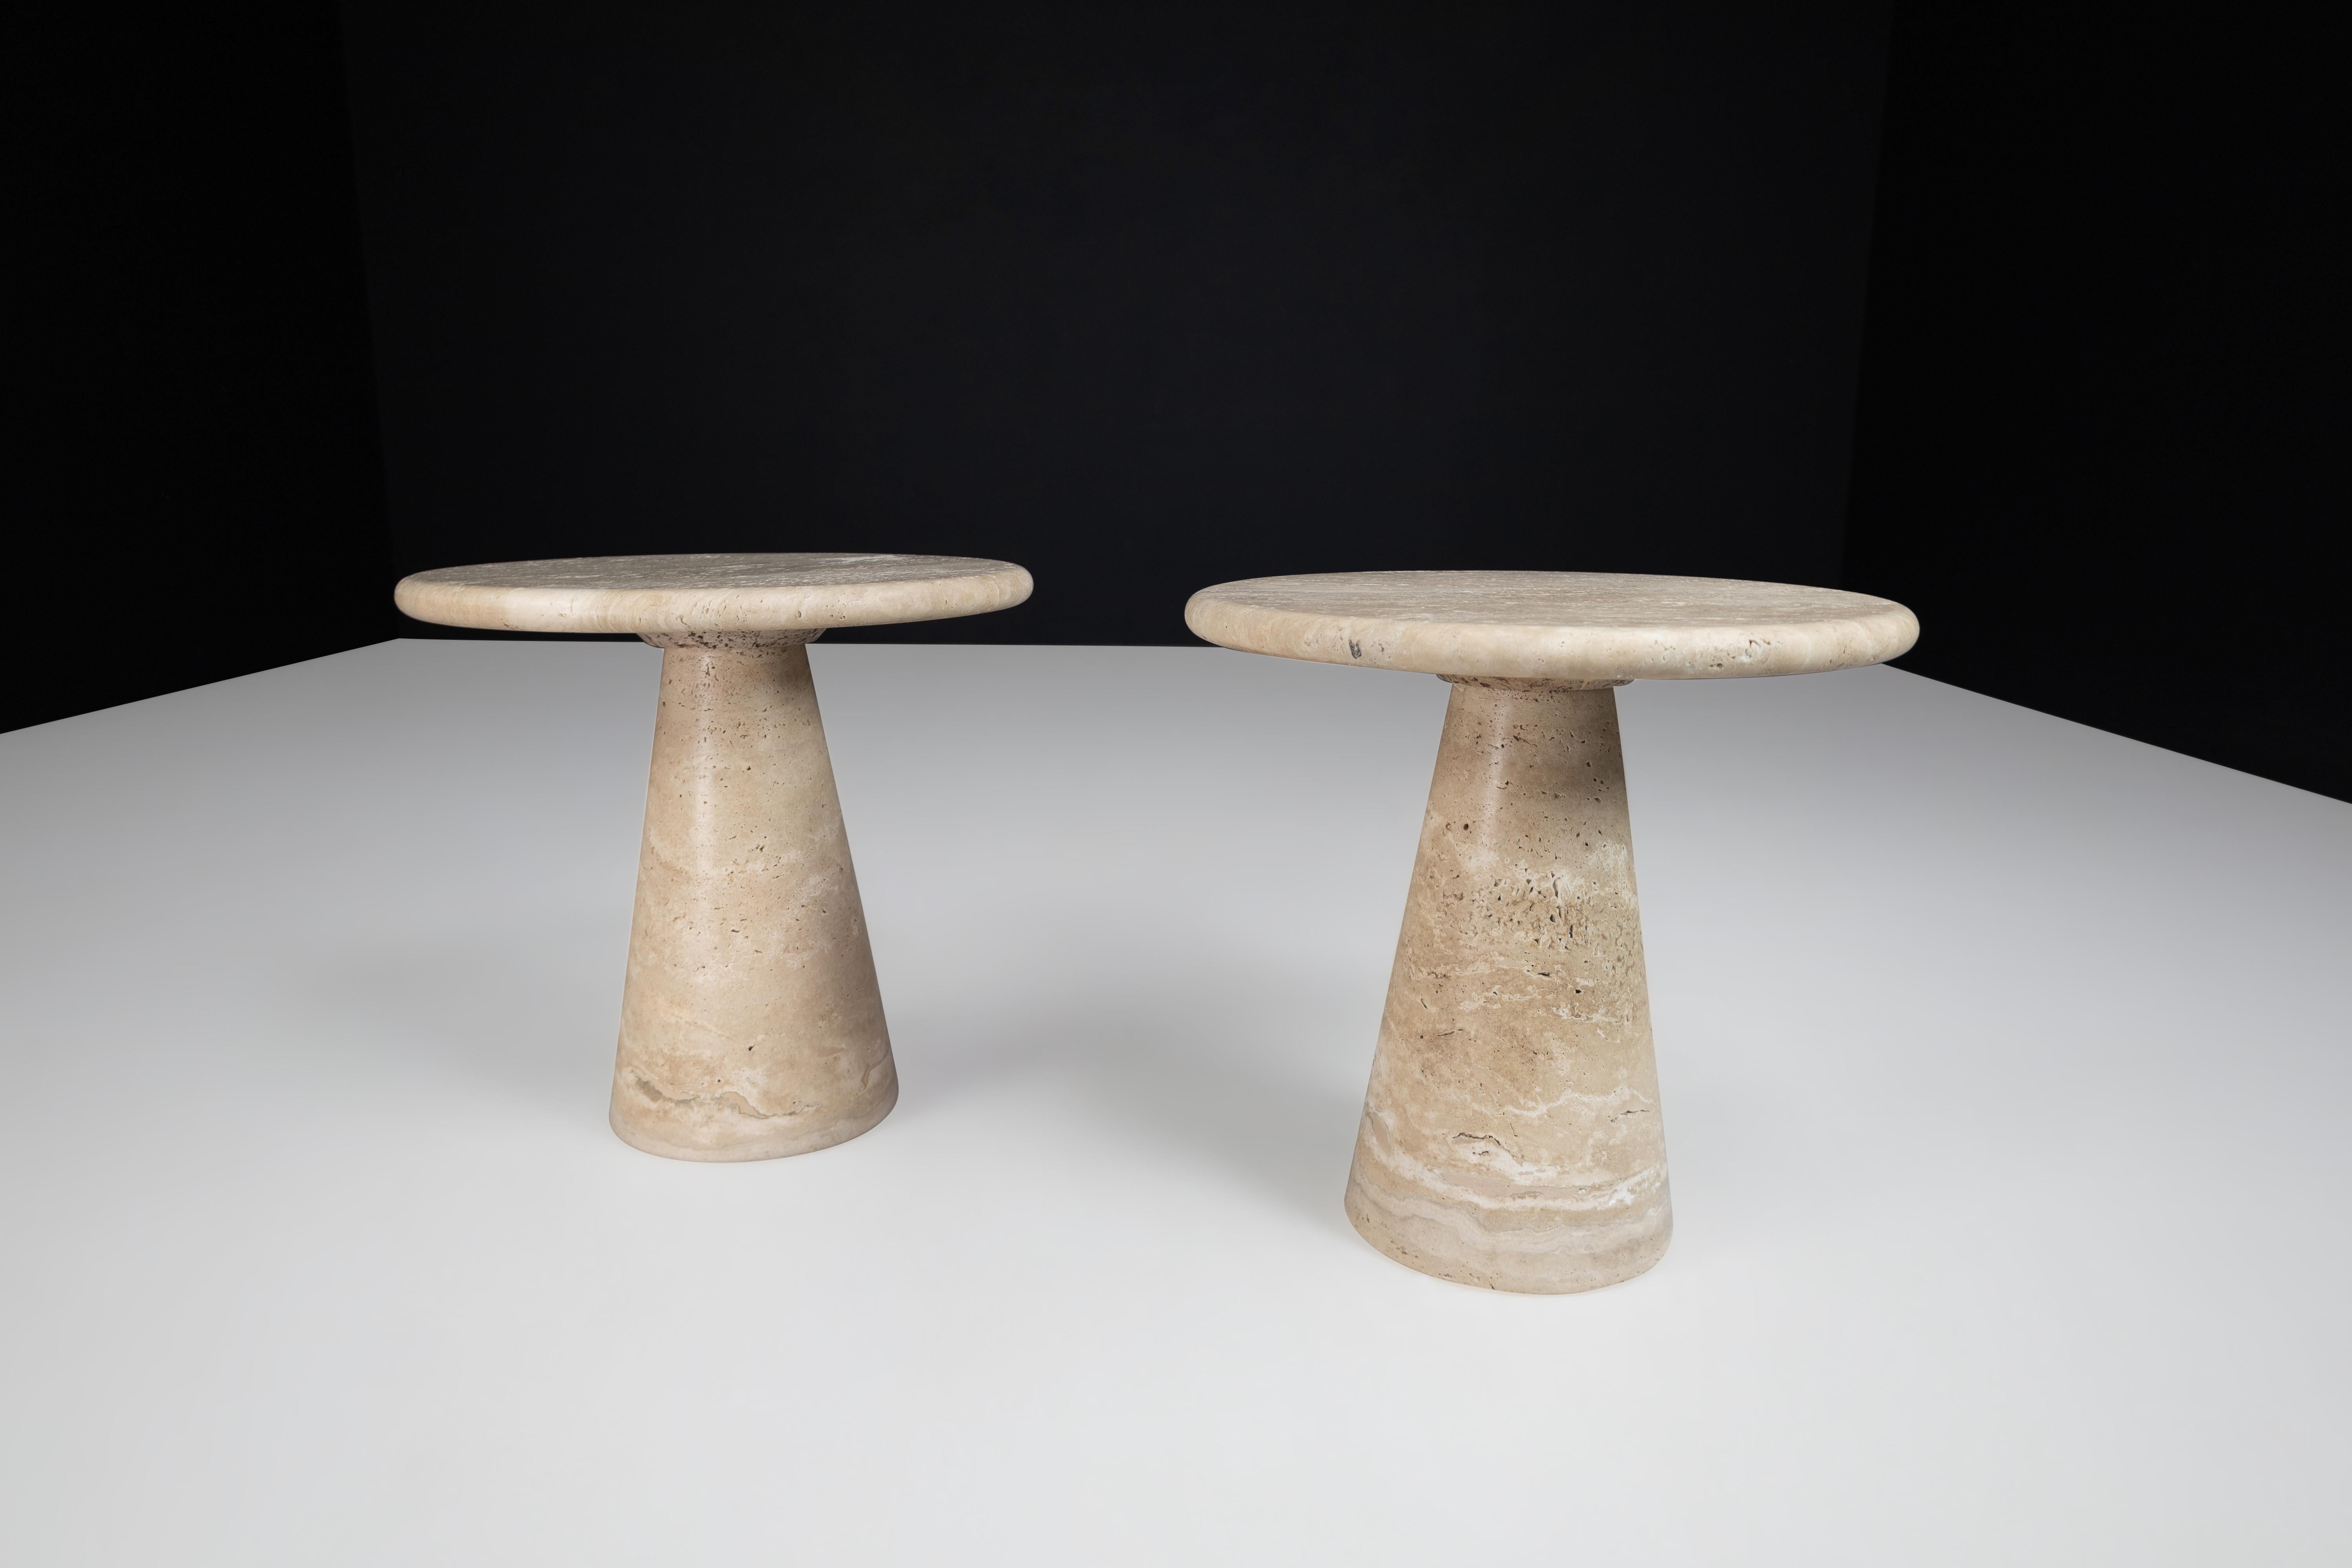  Travertine Circular Side Tables or Coffee Tables, Italy, 1980s  For Sale 1